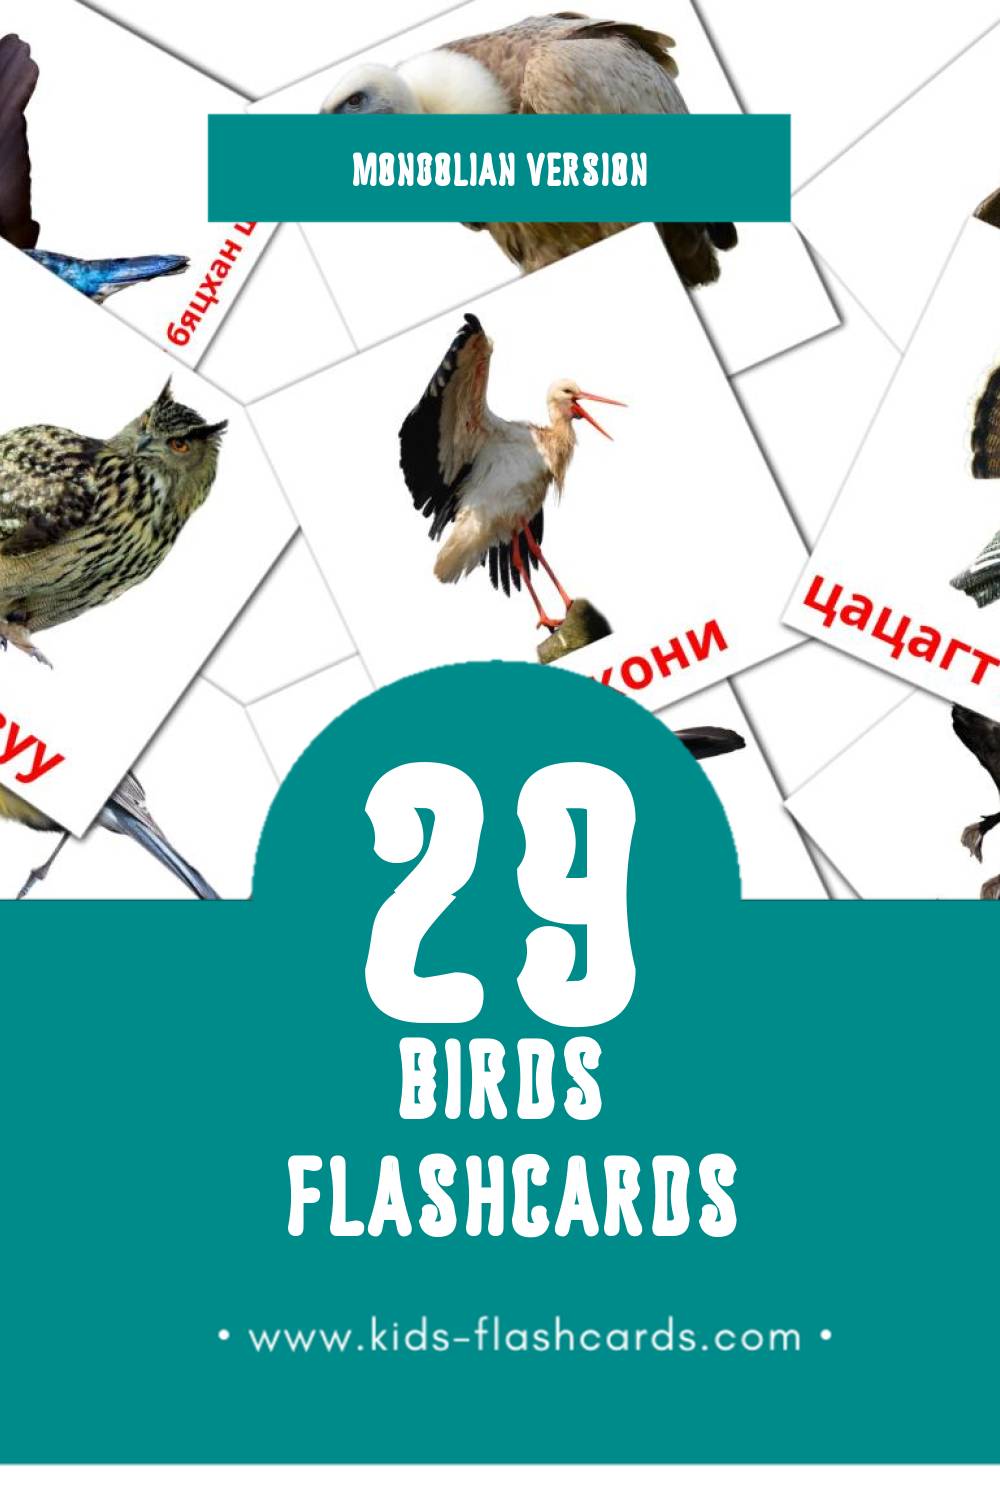 Visual Шувууд Flashcards for Toddlers (29 cards in Mongolian)